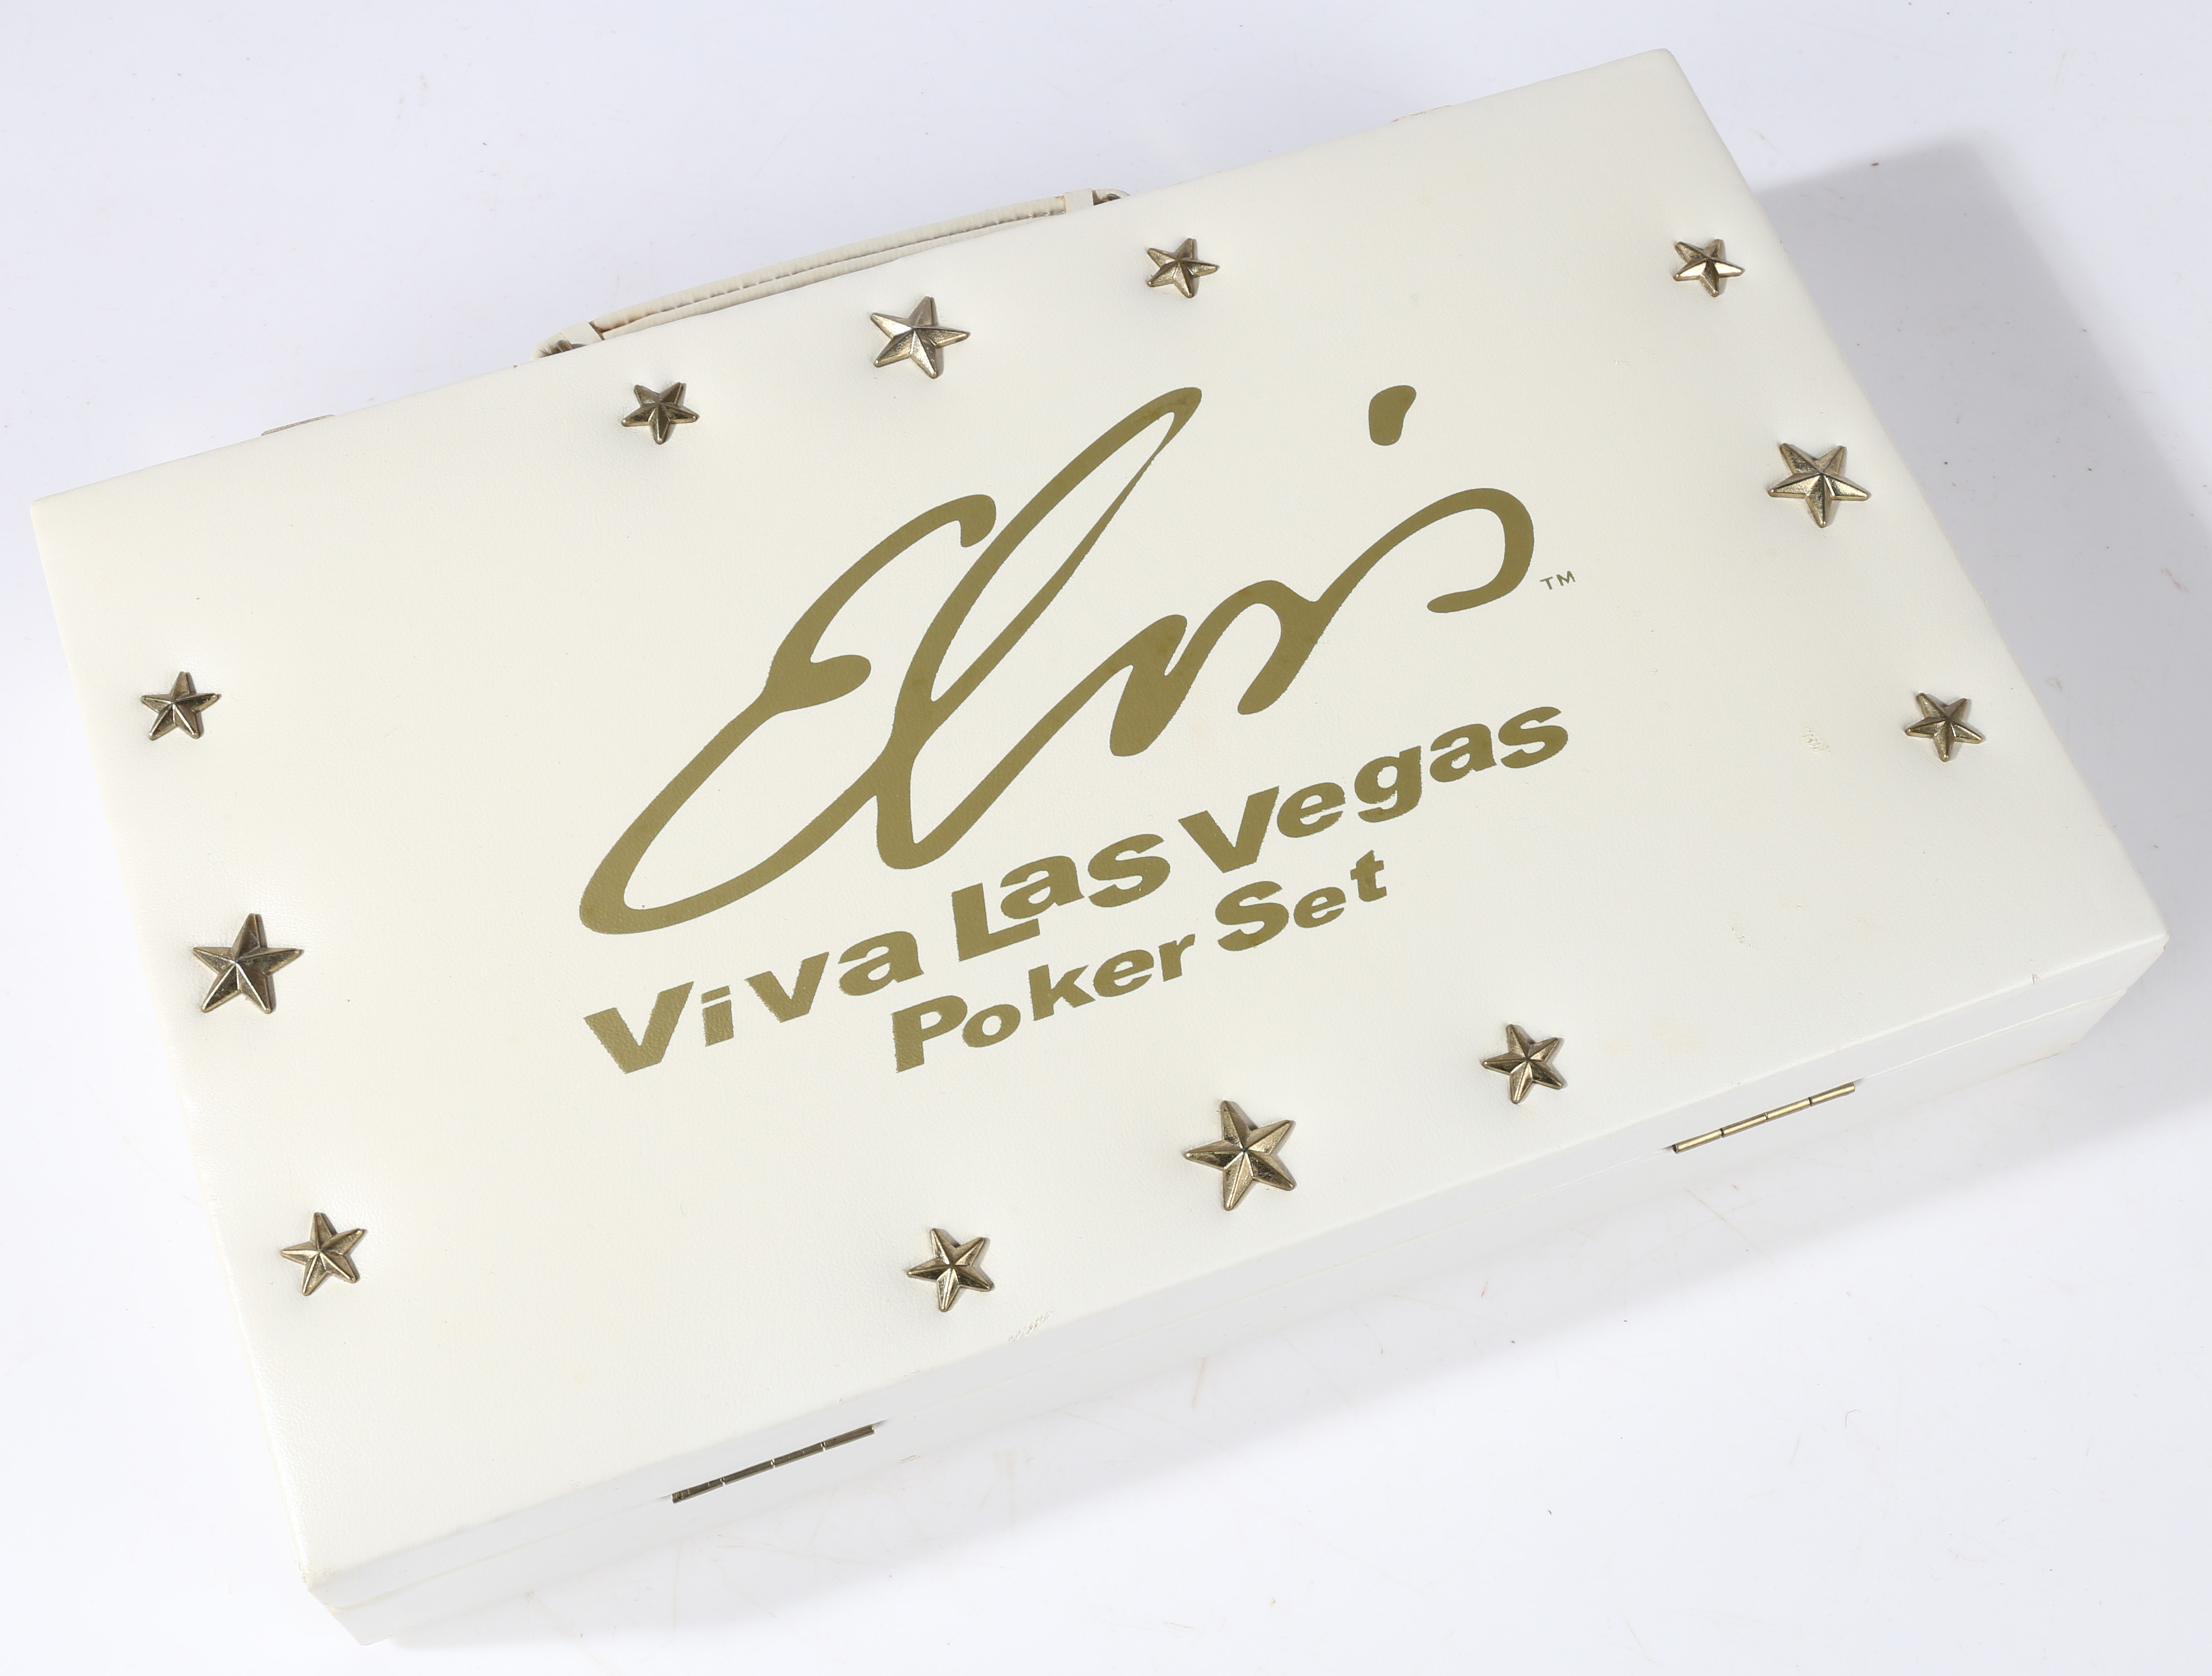 Elvis Presley 'Viva Las Vegas' Poker Set with Poker Chips and Playing Cards